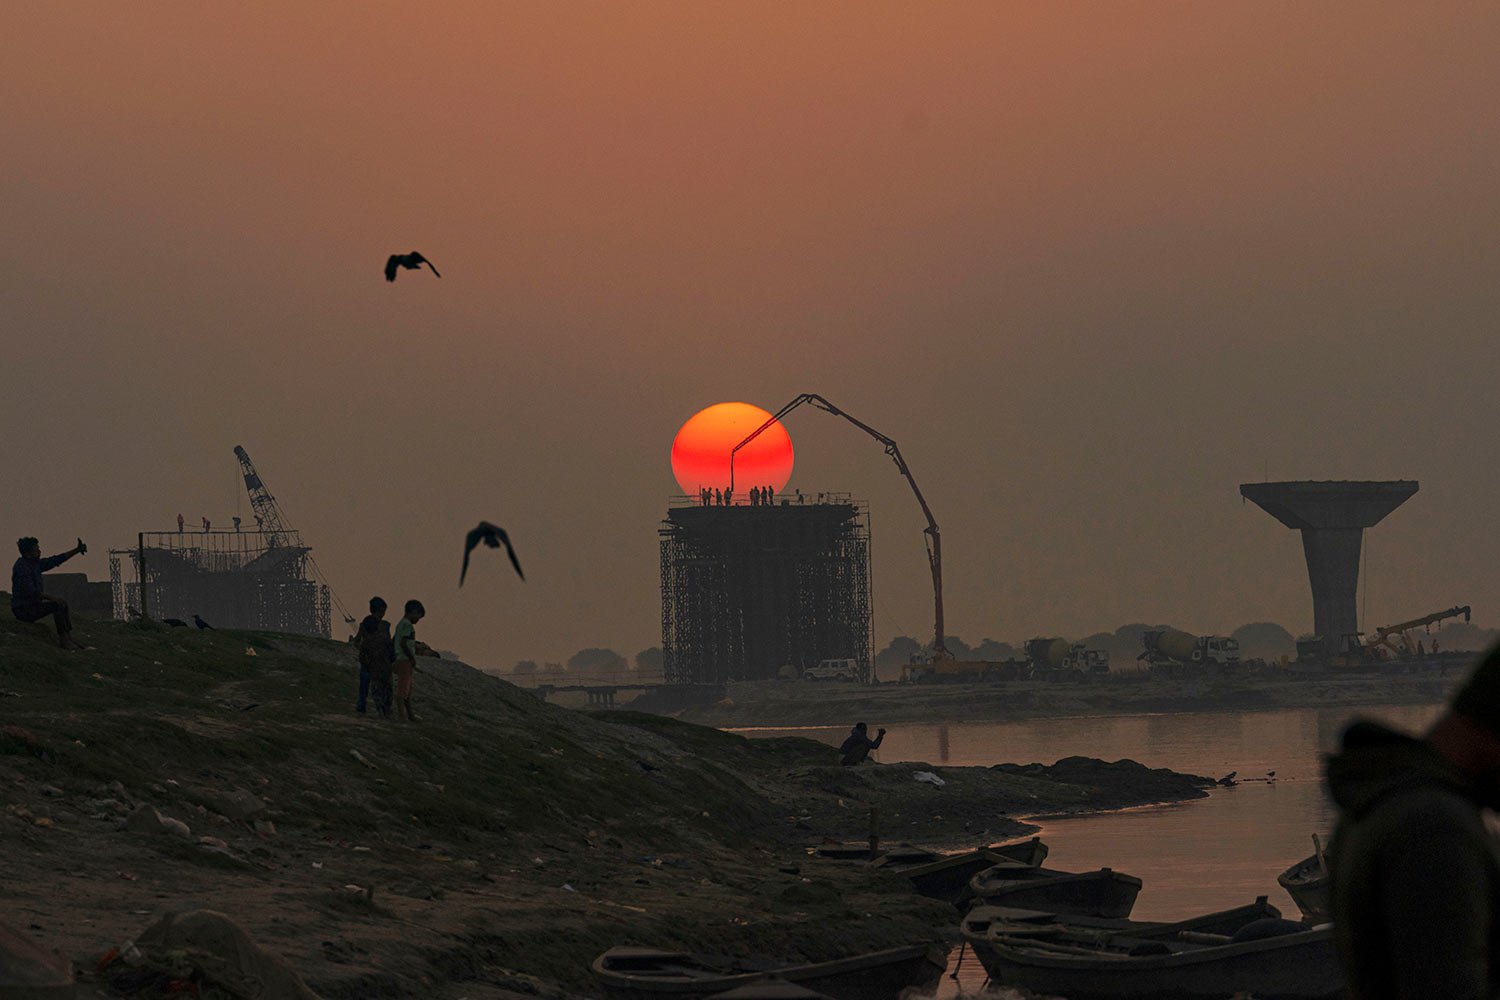  Laborers work at a construction site on the banks of river Ganges as the sun sets in Prayagraj, India, Thursday, Dec. 22, 2022. (AP Photo/Rajesh Kumar Singh) 